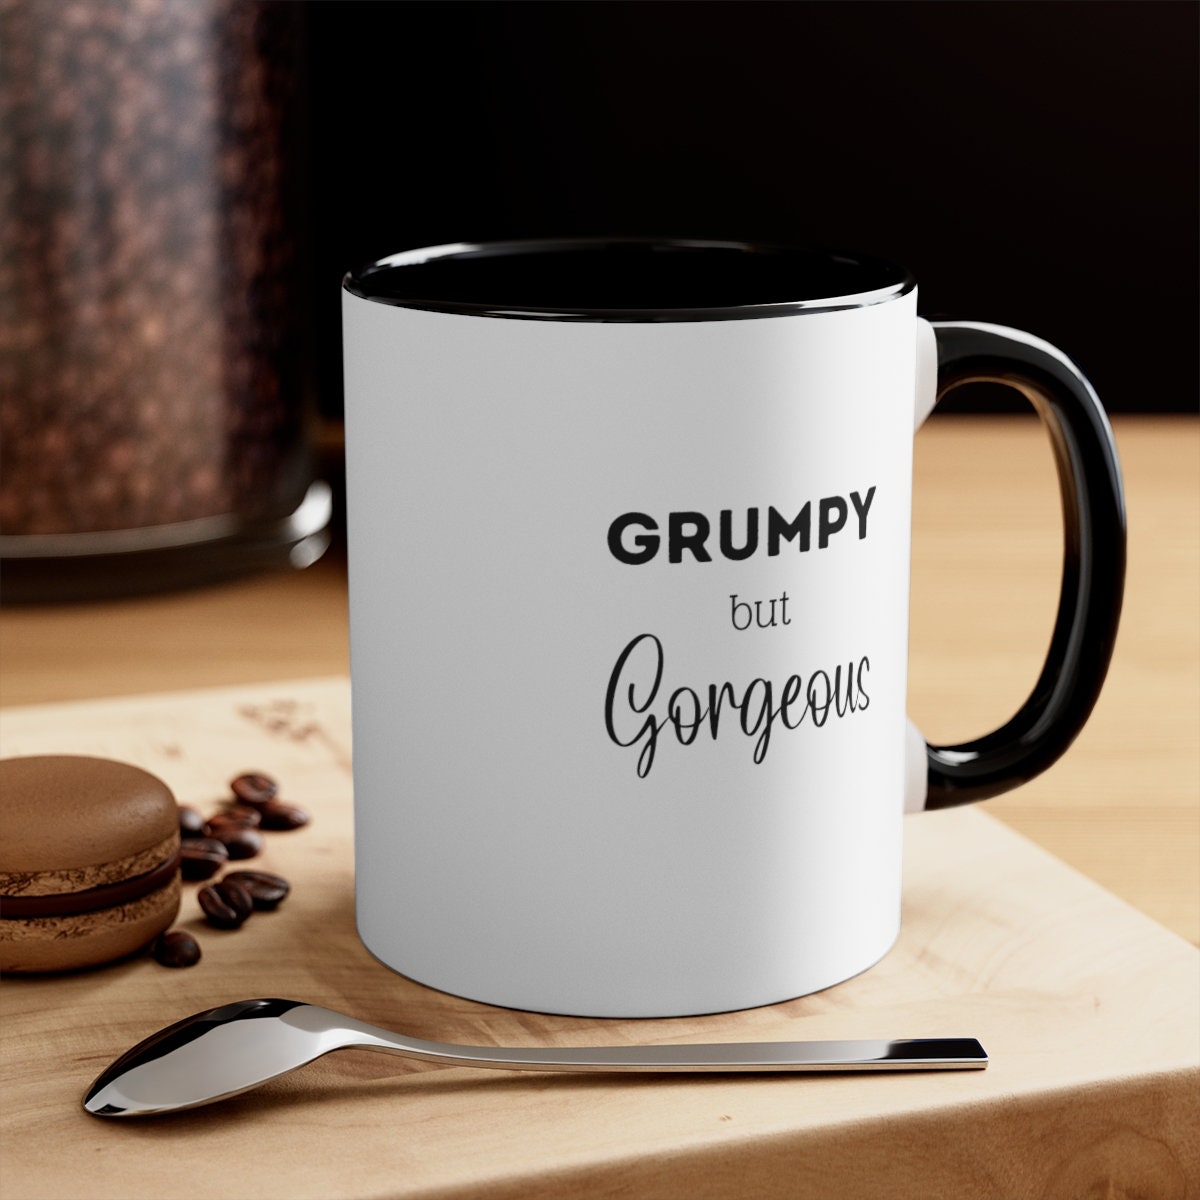  YouNique Designs Funny Coffee Mugs – White Elephant